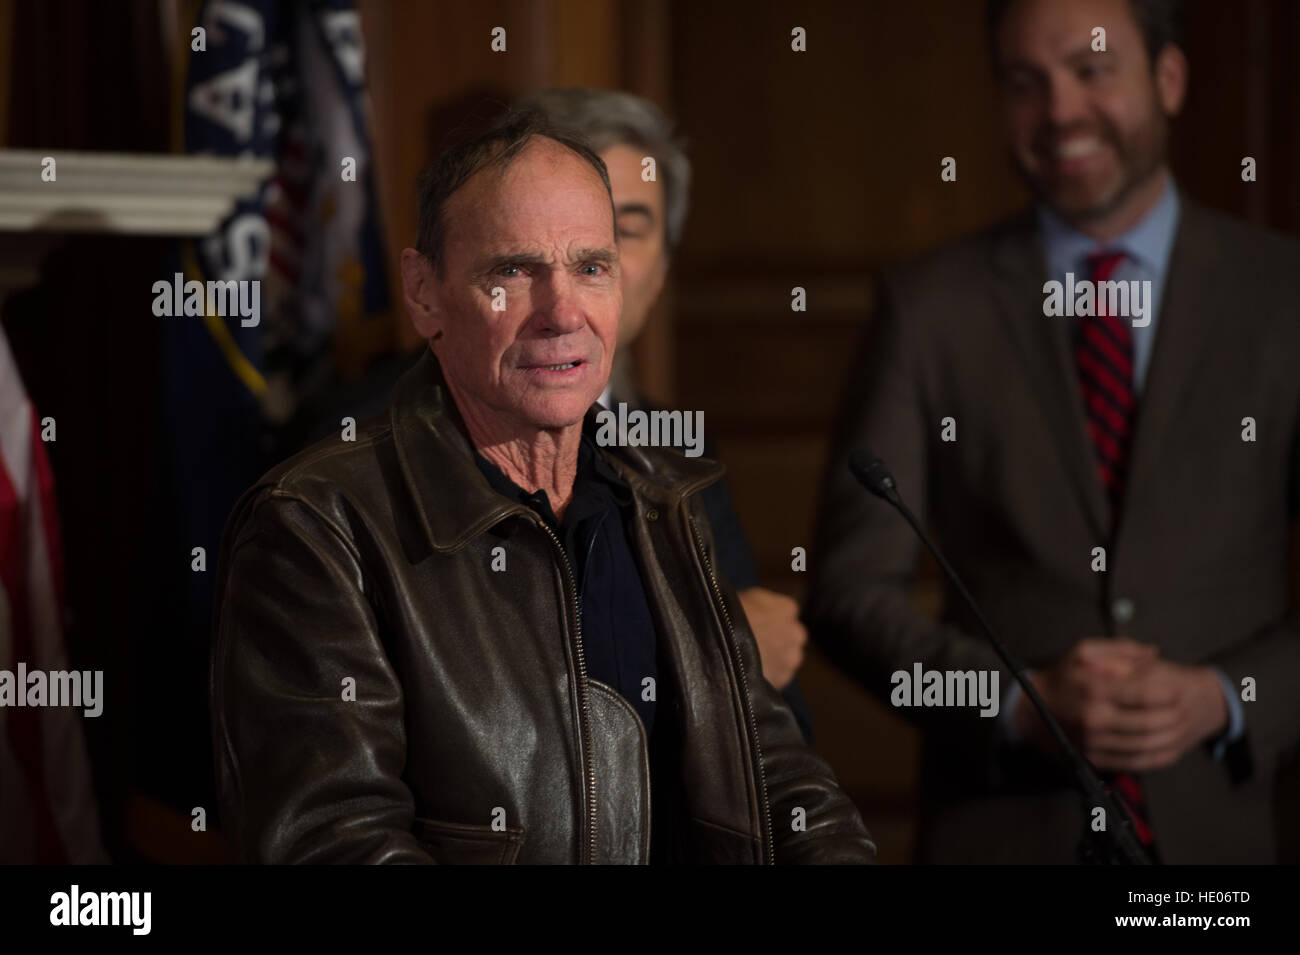 Washington, USA. 15th Dec, 2016. Contemporary artist Michael Heizer speaks during an easement signing ceremony in the U.S. Capitol December 15, 2016 in Washington, DC. The easement will help protect the Basin and Range National Monument in Nevada that contains the massive earthworks art project City by Heizer. © Planetpix/Alamy Live News Stock Photo